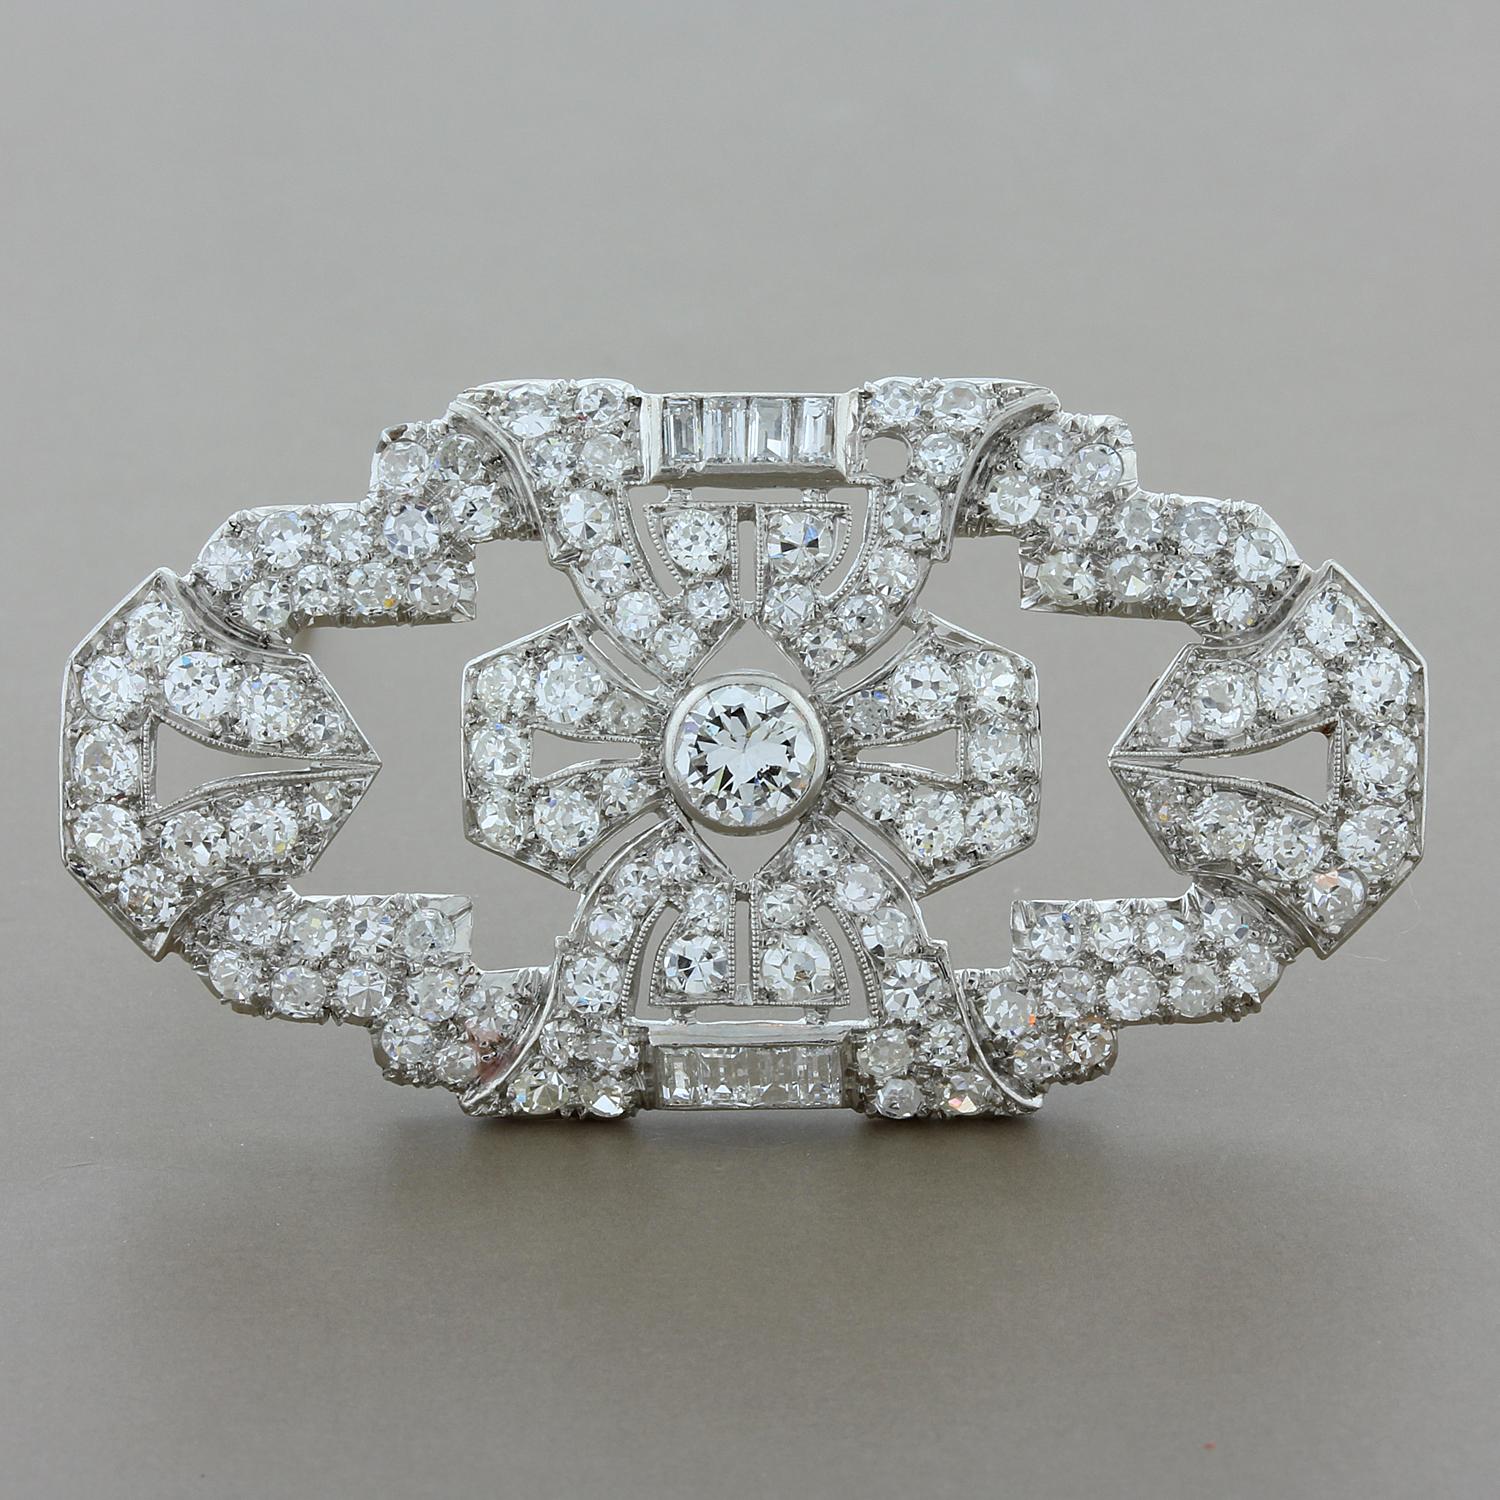 An estate art-deco brooch with 8.60 carats of European cut diamonds. A timeless design from the 1920's, a brooch that goes well with any outfit, set in platinum with a 18K yellow gold pin.

Brooch Length: 2 inches
Brooch Width: 1 inch